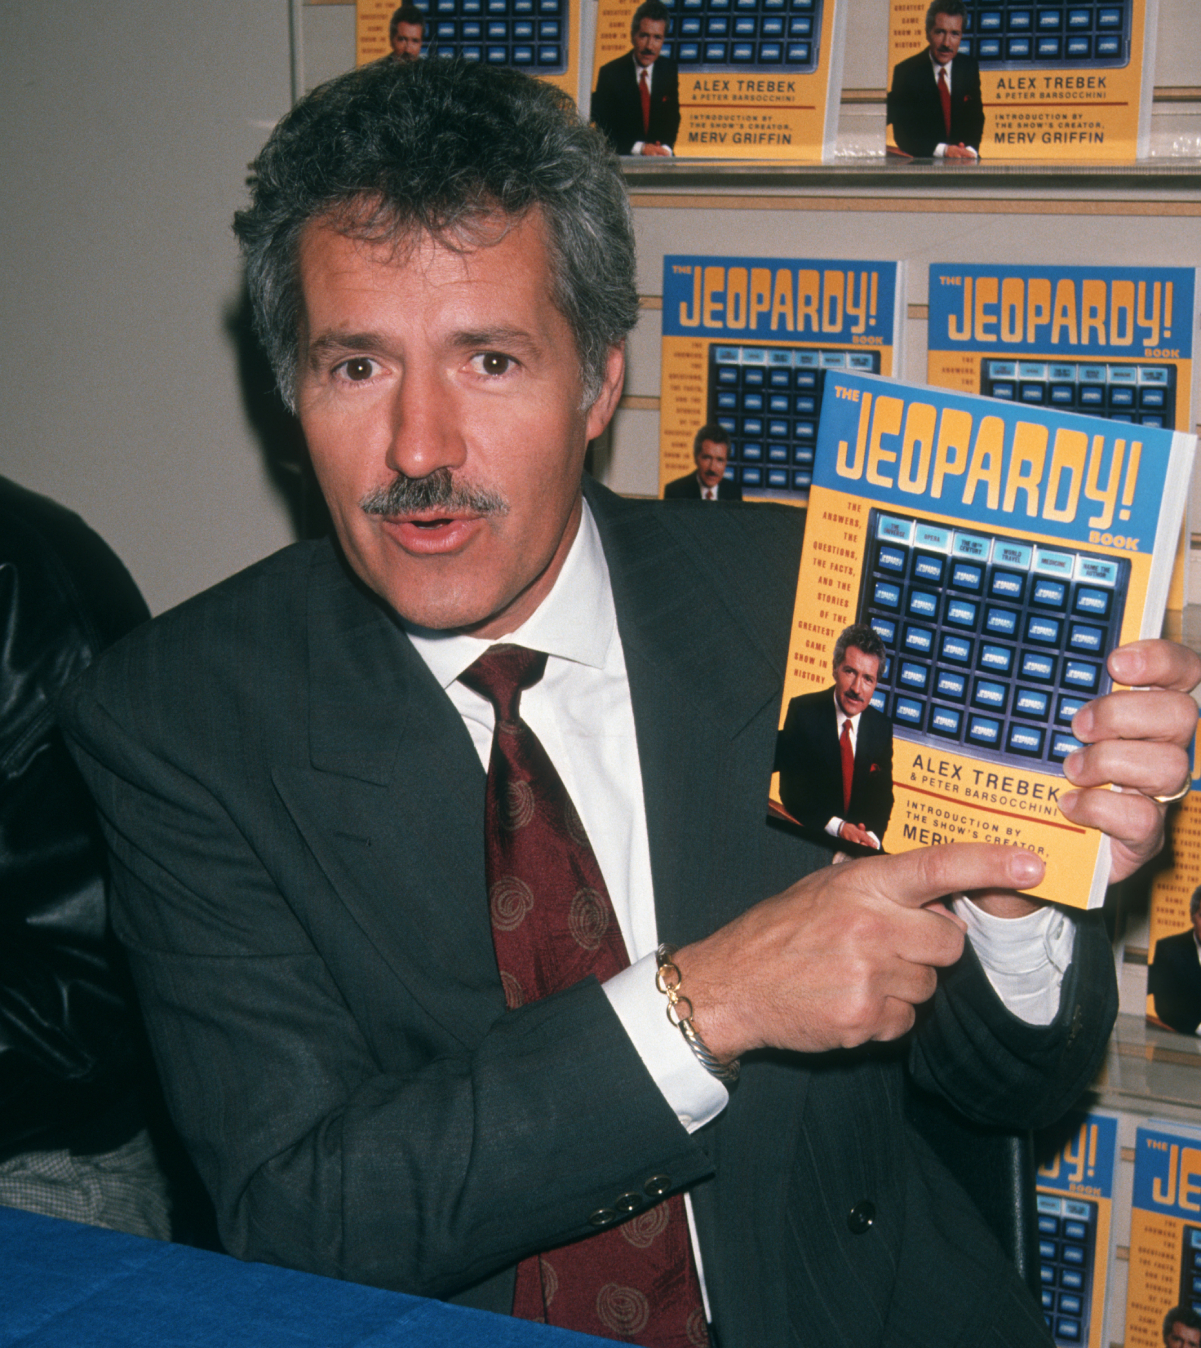 'Jeopardy!' host Alex Trebek sporting his trademark mustache while signing copies of 'The Jeopardy Book' in 1990